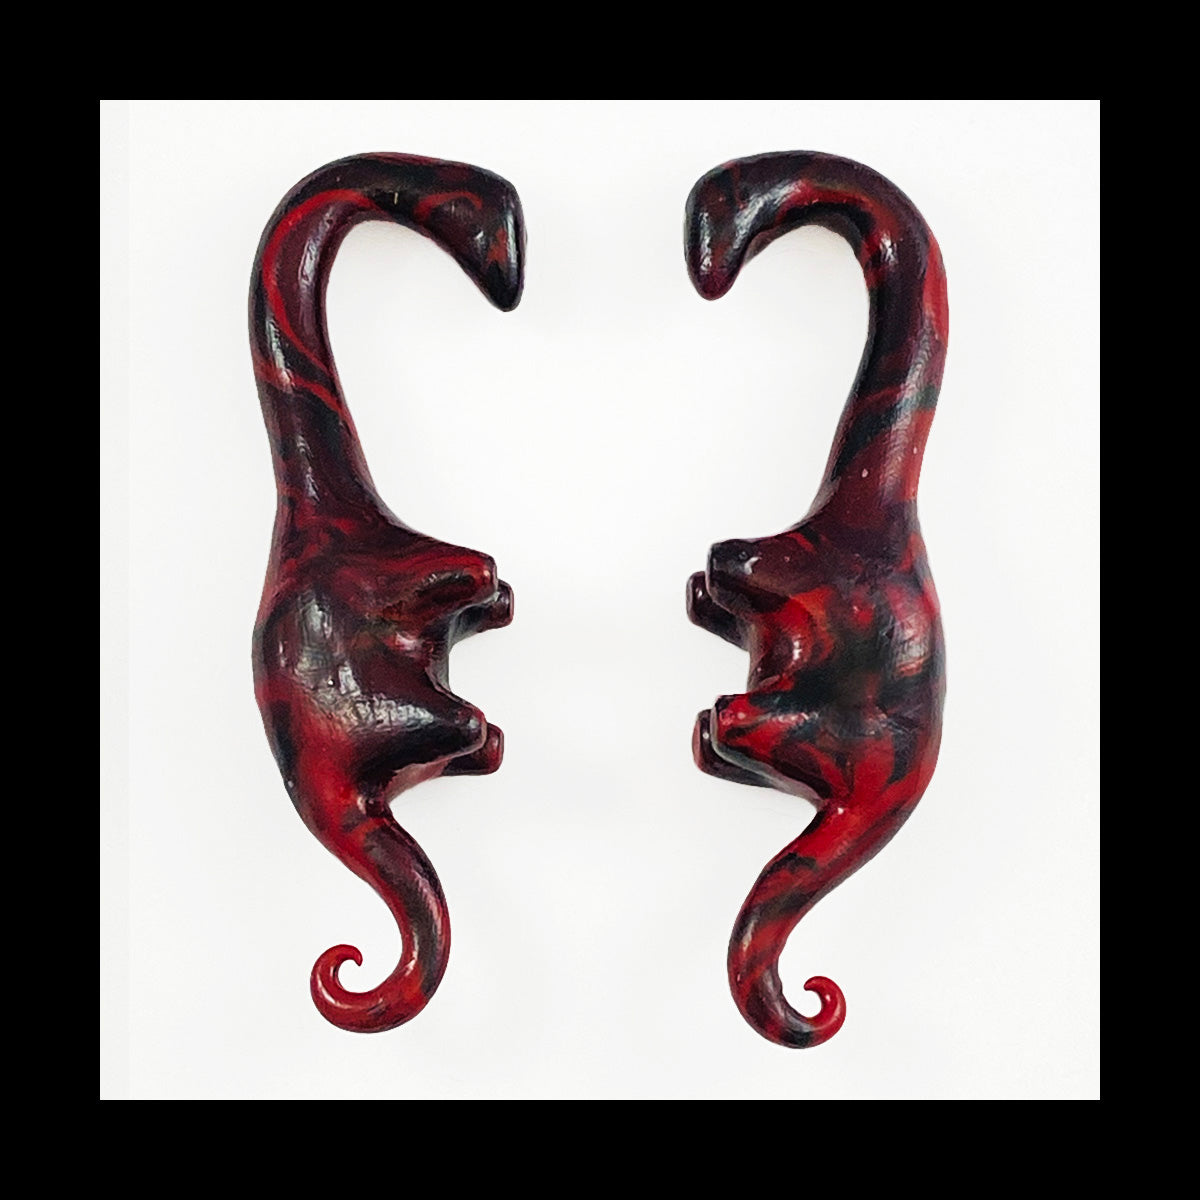 0g 8mm Black and Red Dinosaur Handmade Clay Gauges